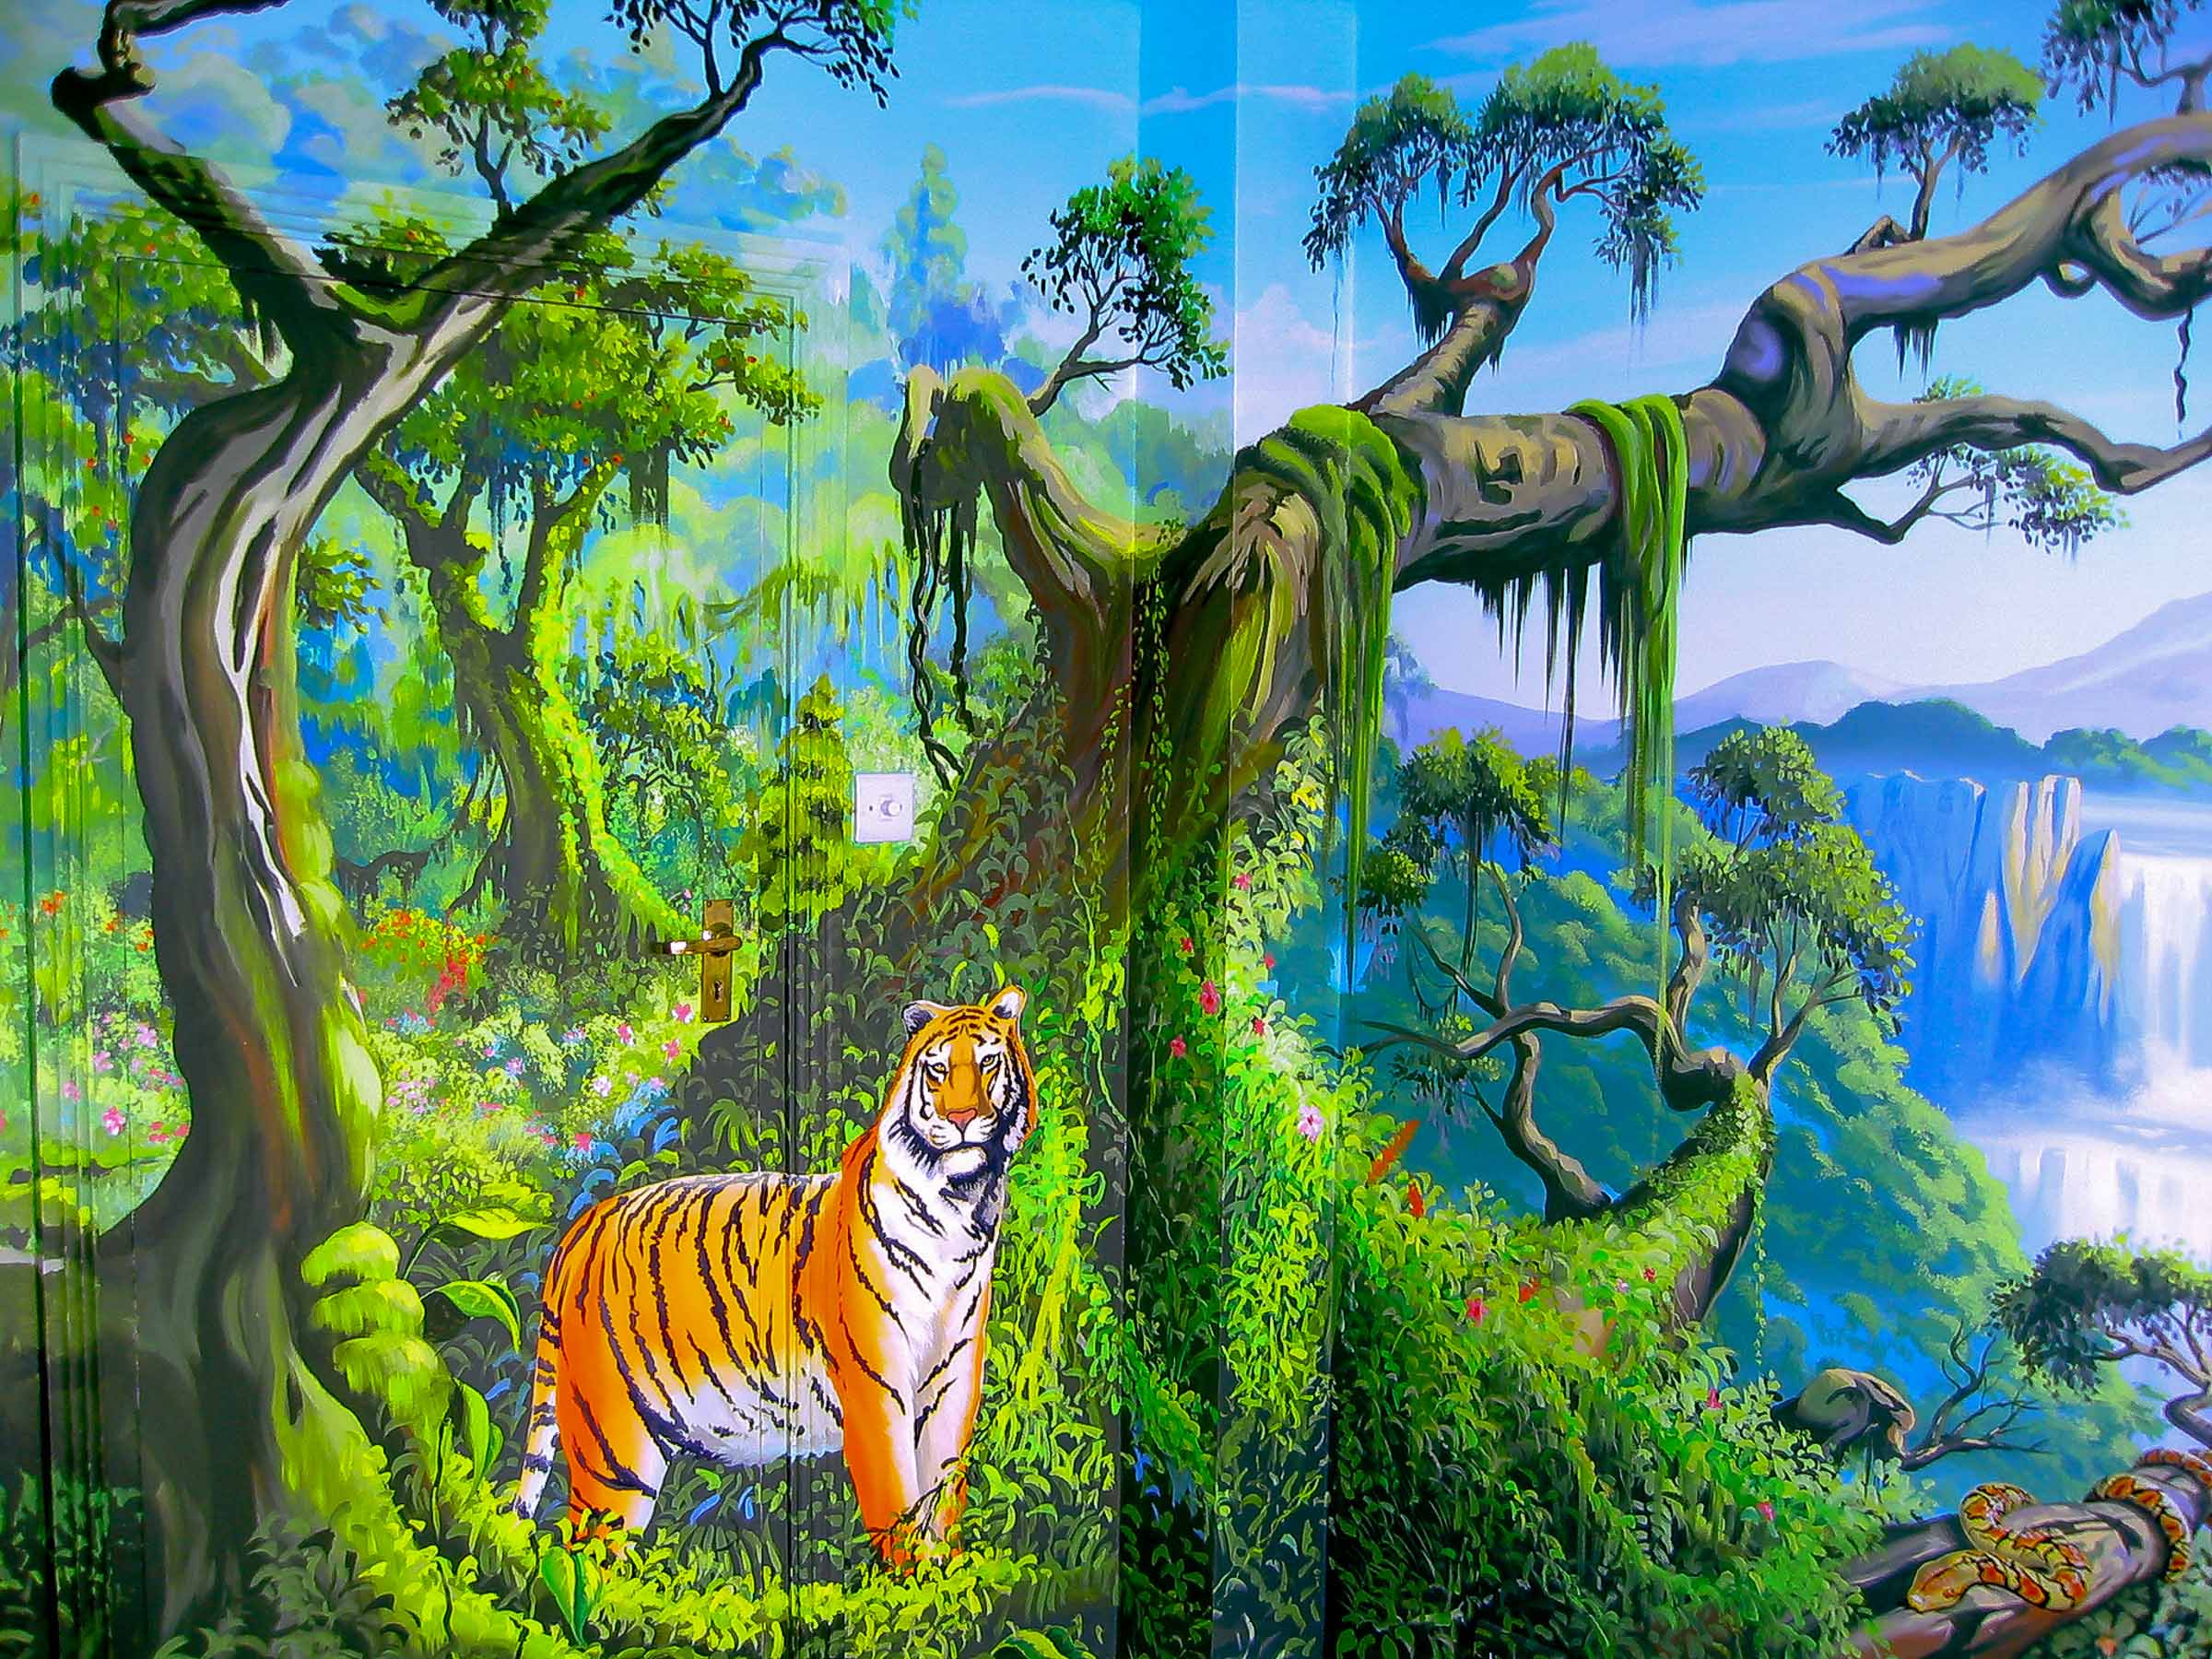 Corner of the jungle mural with tiger, concealing room features like the door and boxed in section